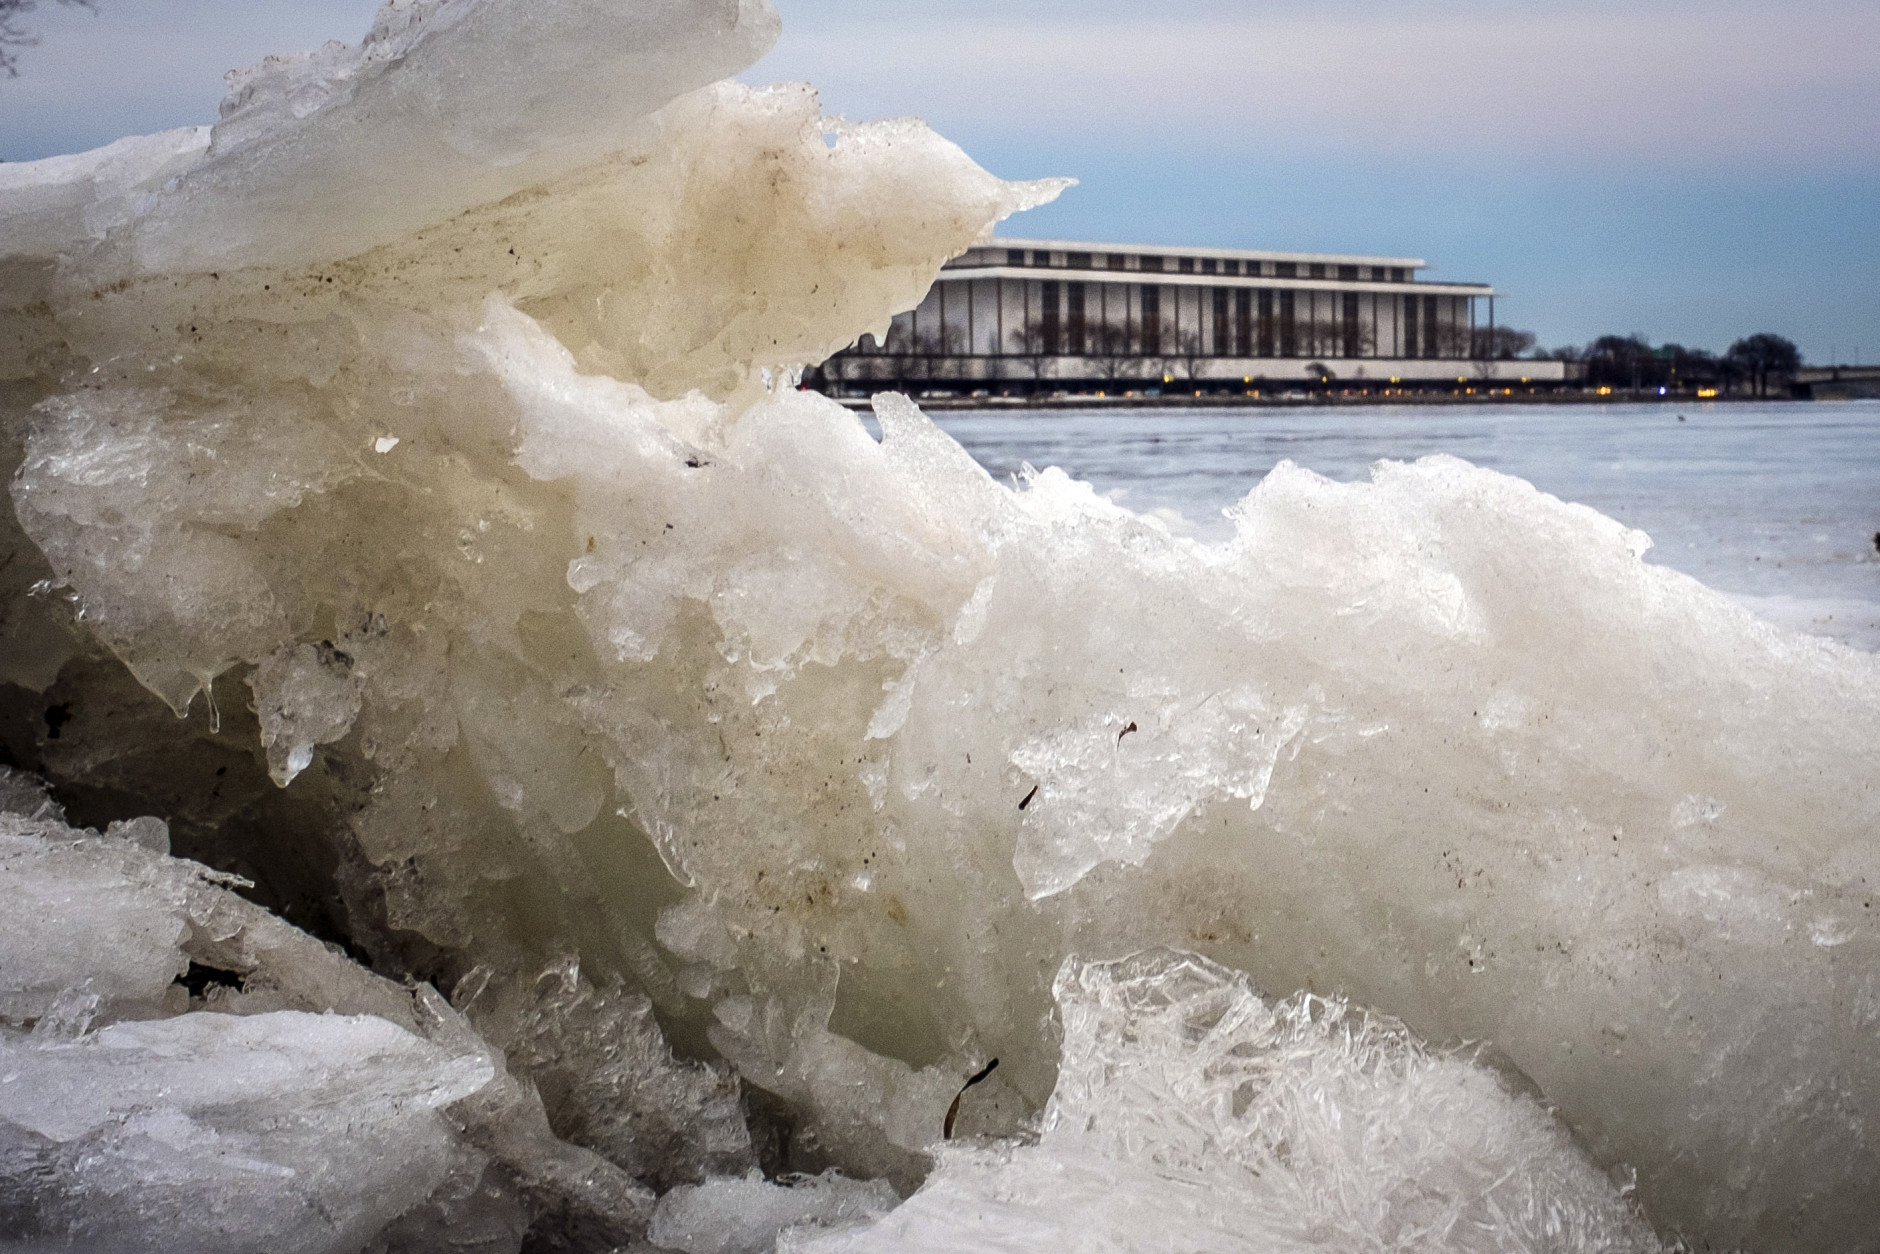 The Kennedy Center for the Performing Arts is framed in the ice along the edge of the Potomac River in Washington, Wednesday evening, Feb. 25, 2015. The Nation's Capitol hasn't thawed out from the last winter weather blast as a new front heads toward the area overnight. (AP Photo/J. David Ake)